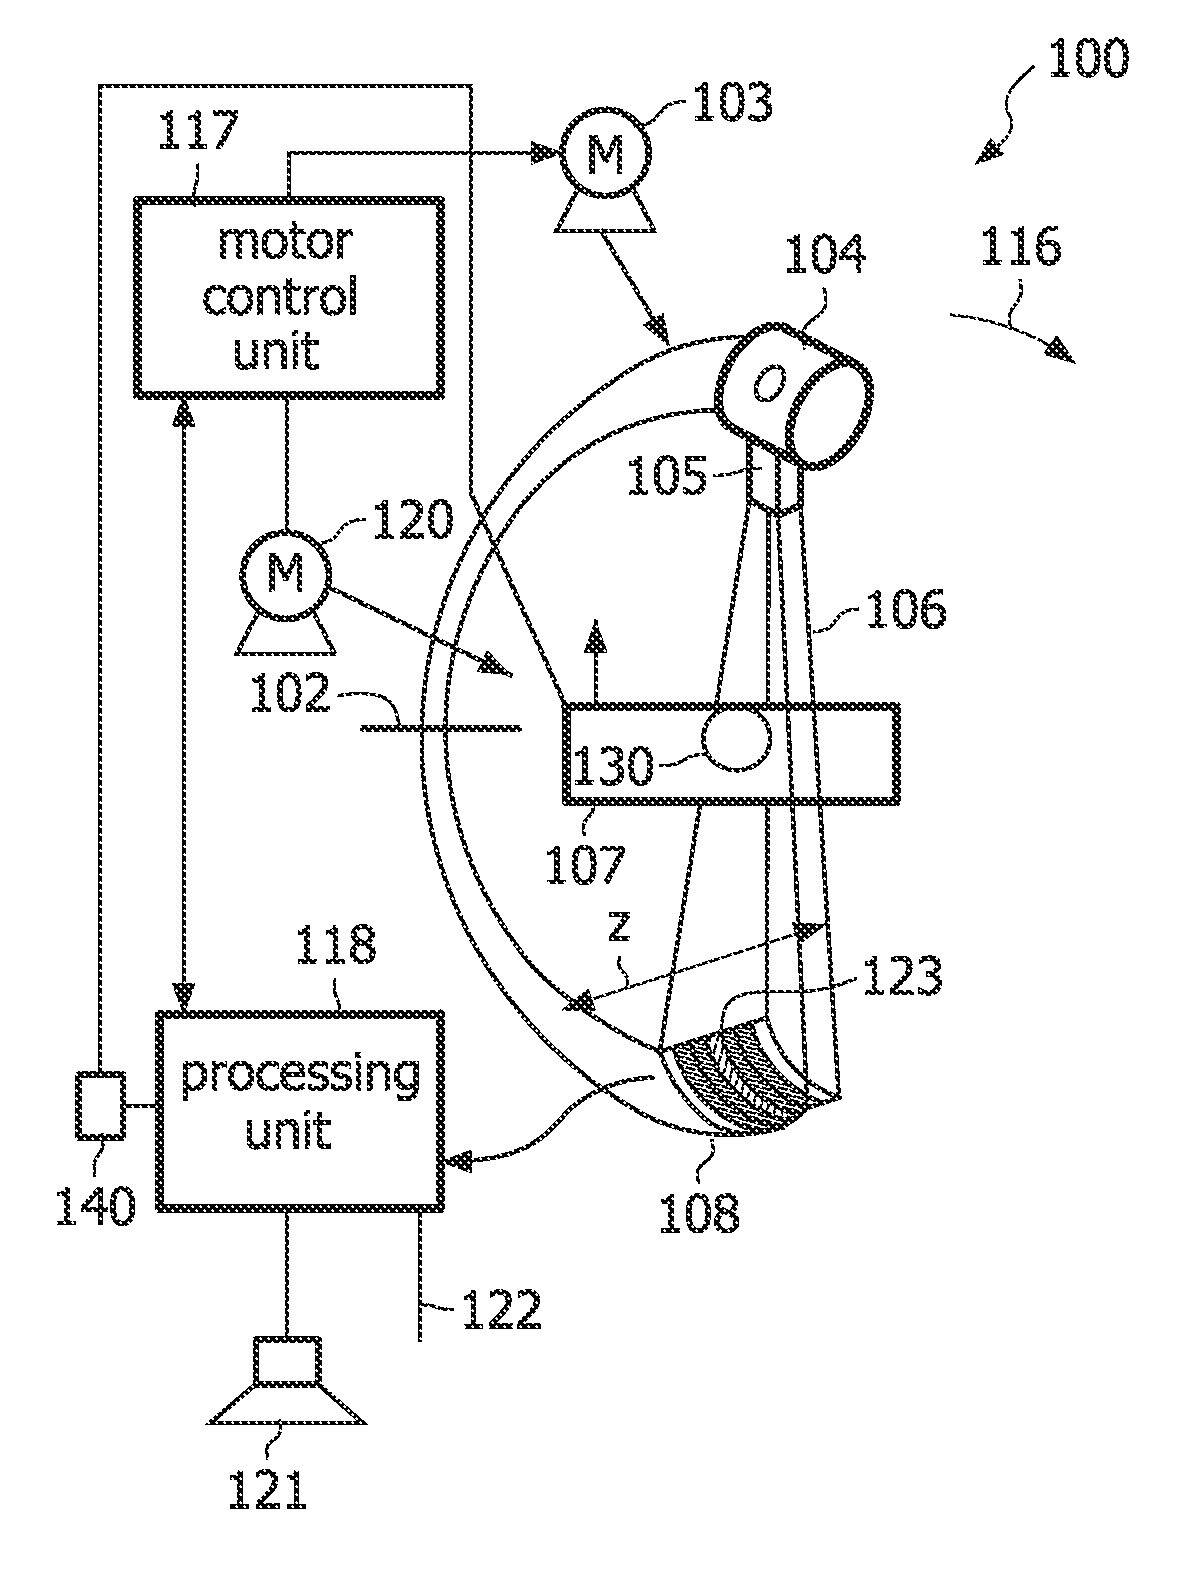 Computer Tomography (CT) C-arm system and method for examination of an object